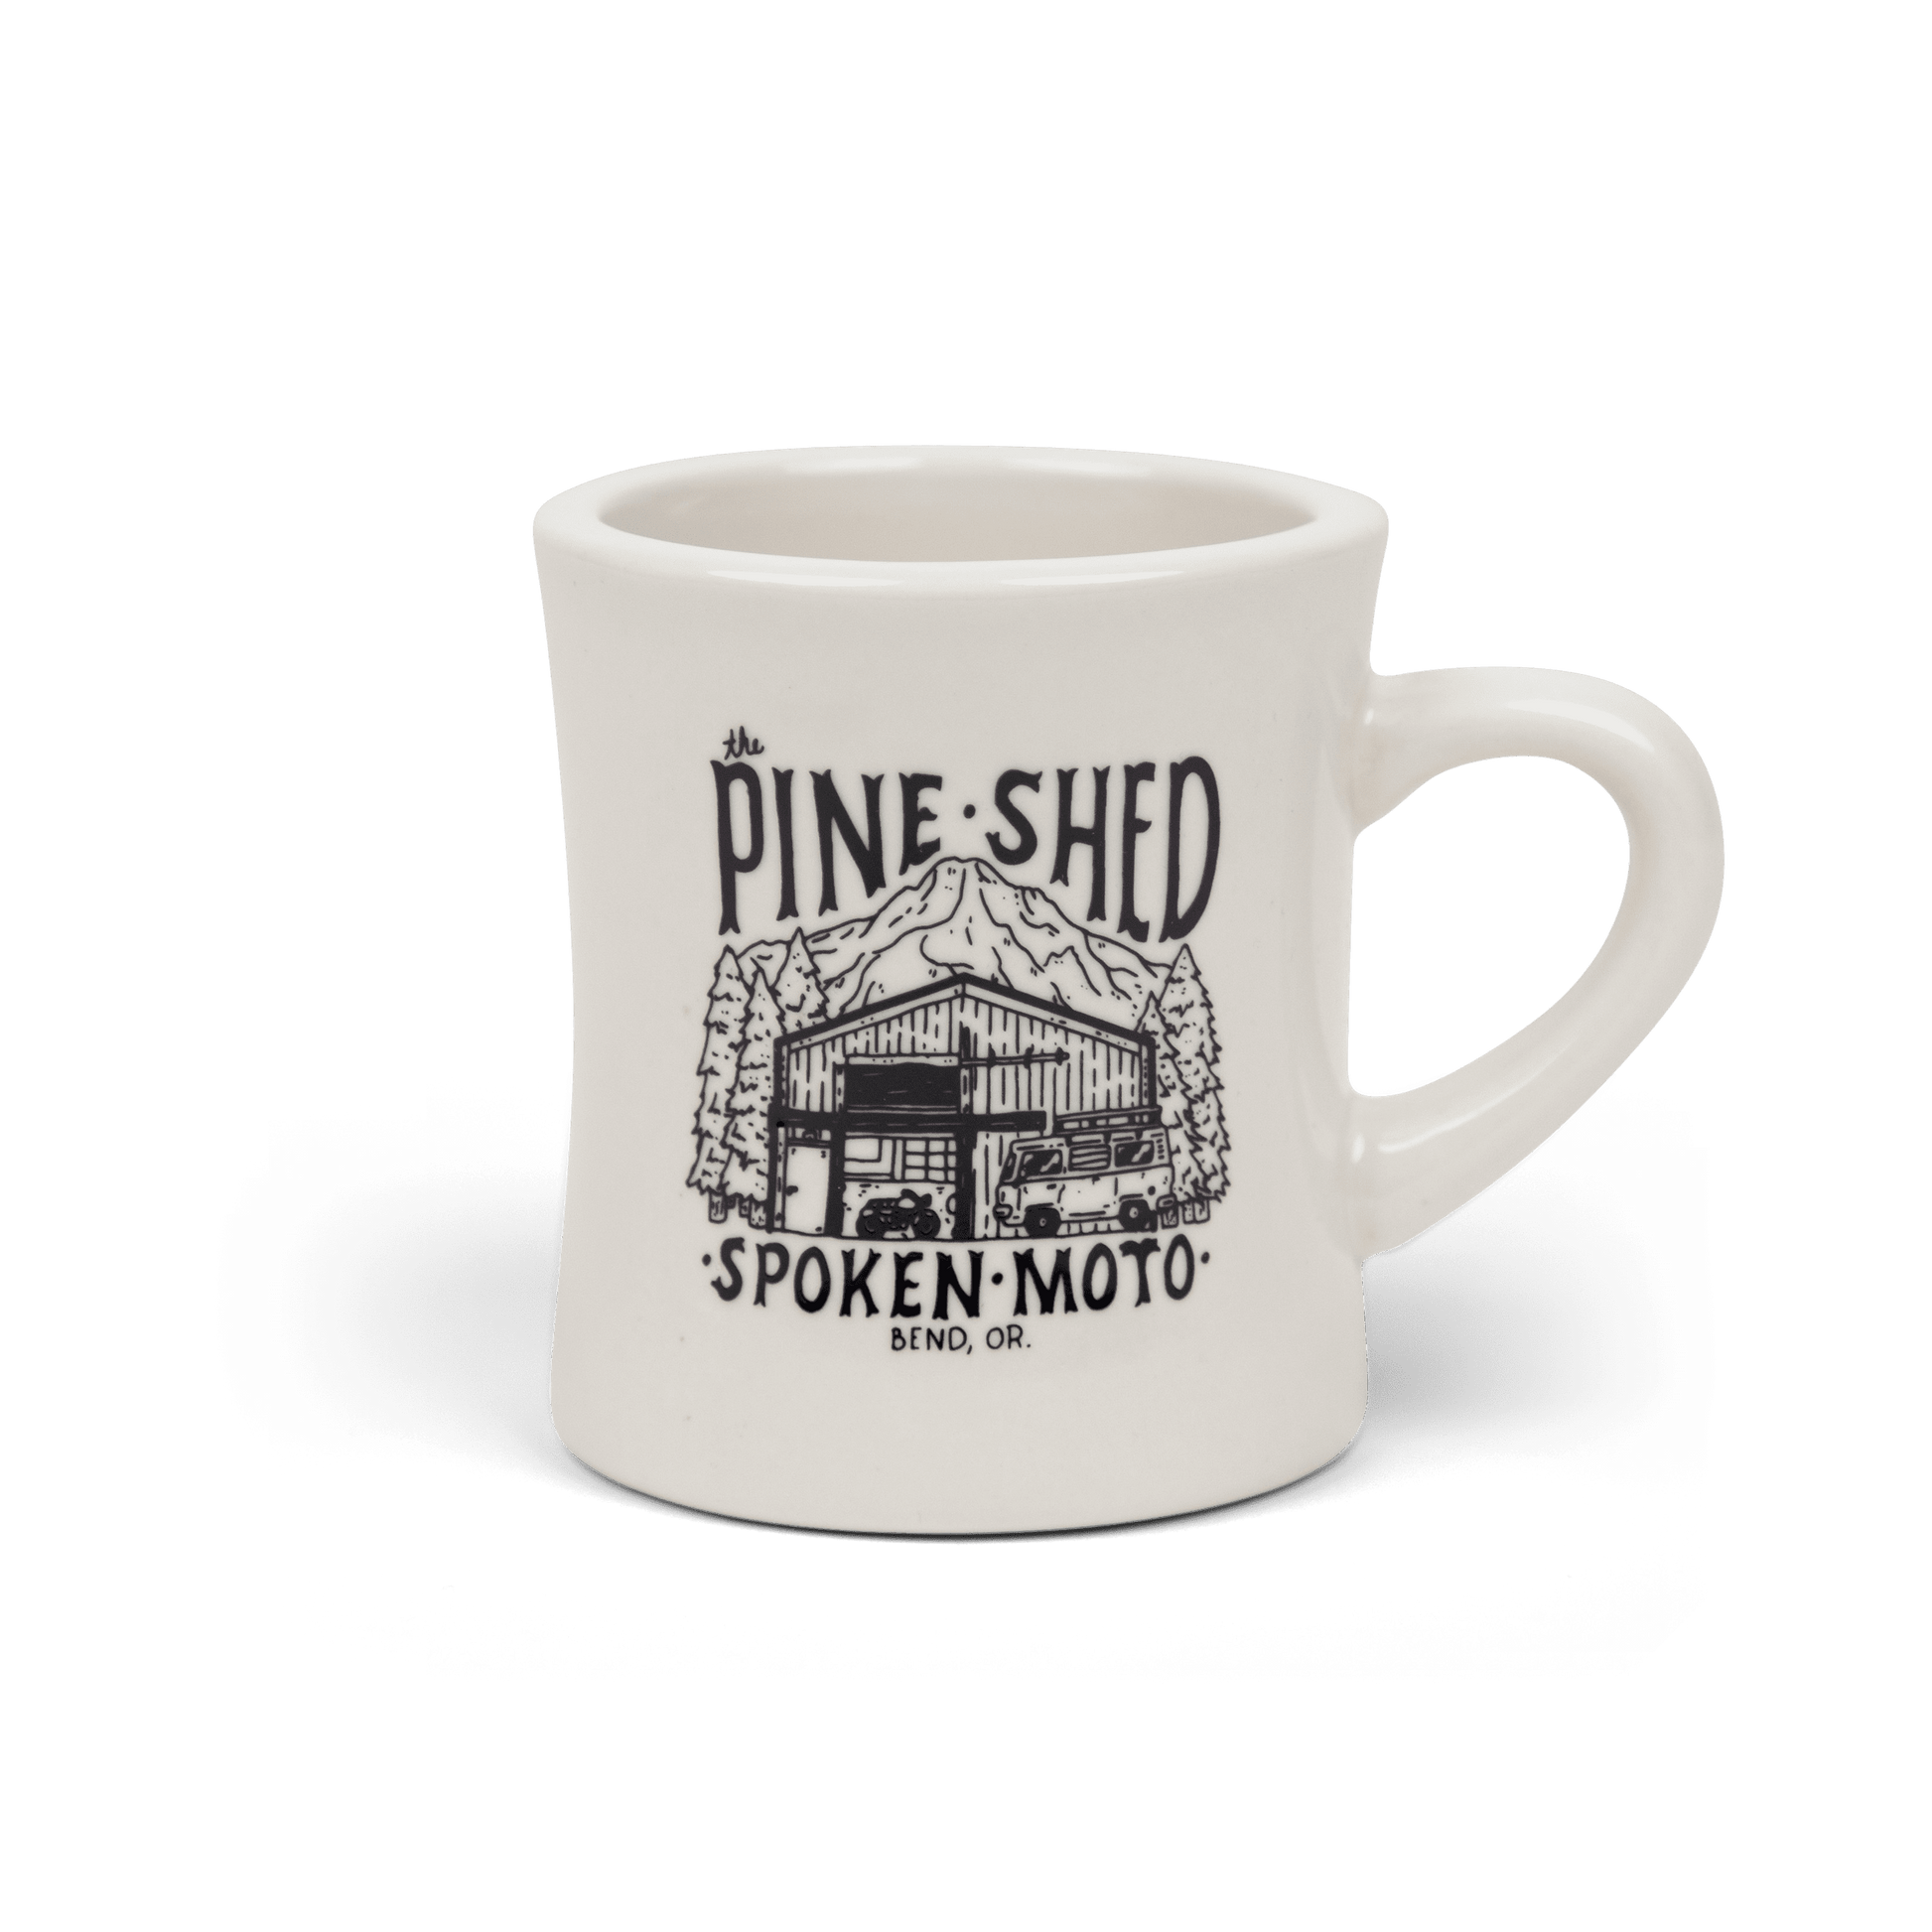 Pine Shed Diner Mug from the front.